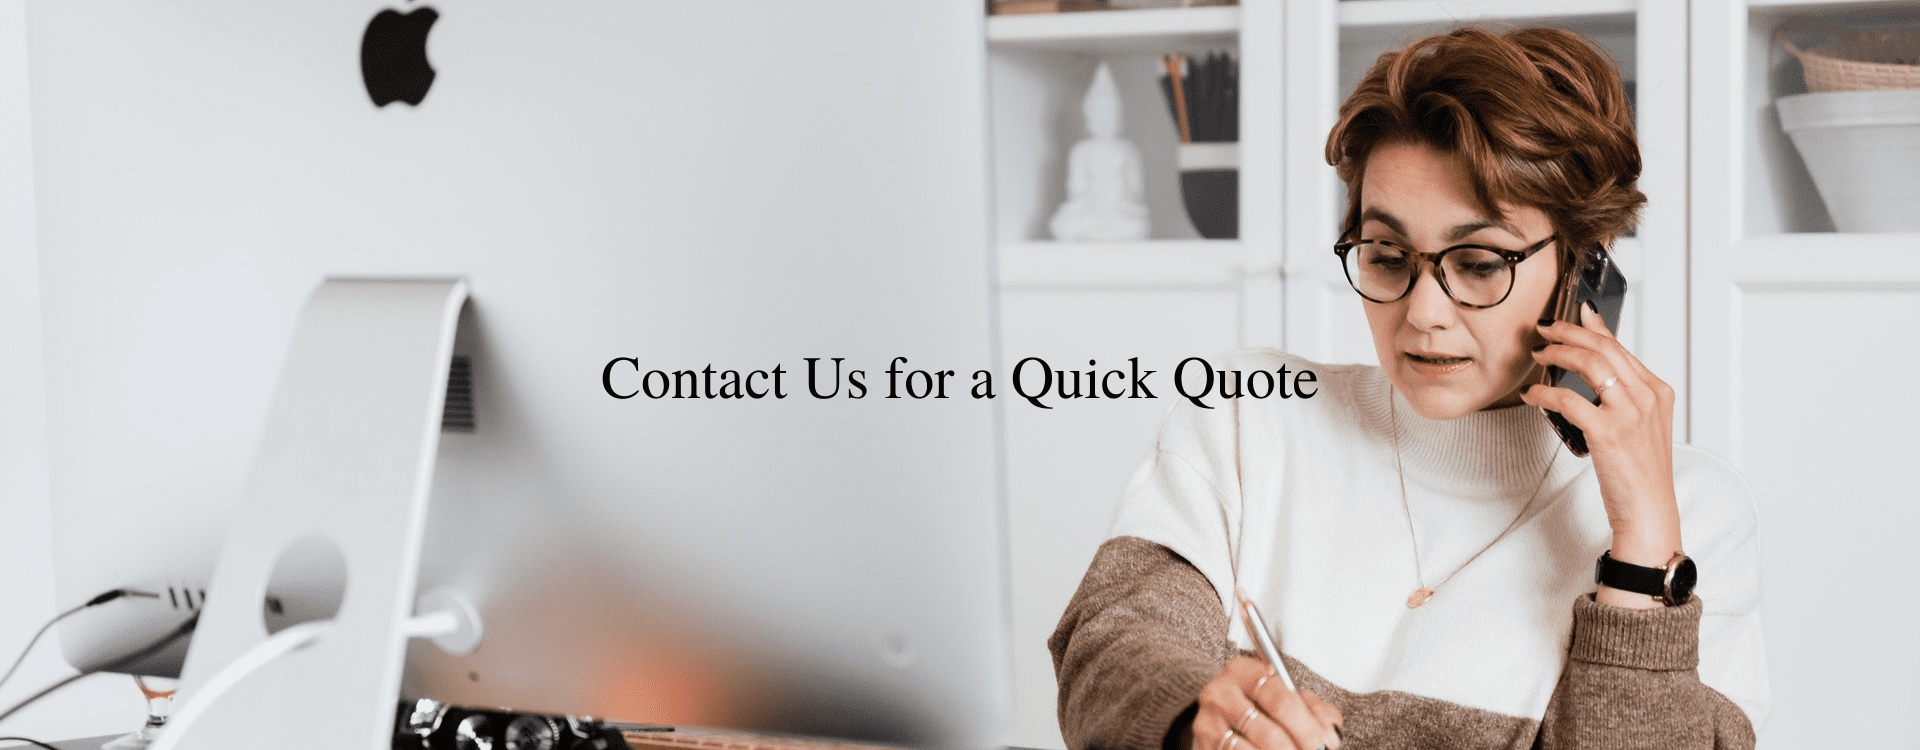 DAC Audit Services ISO Quick Quote